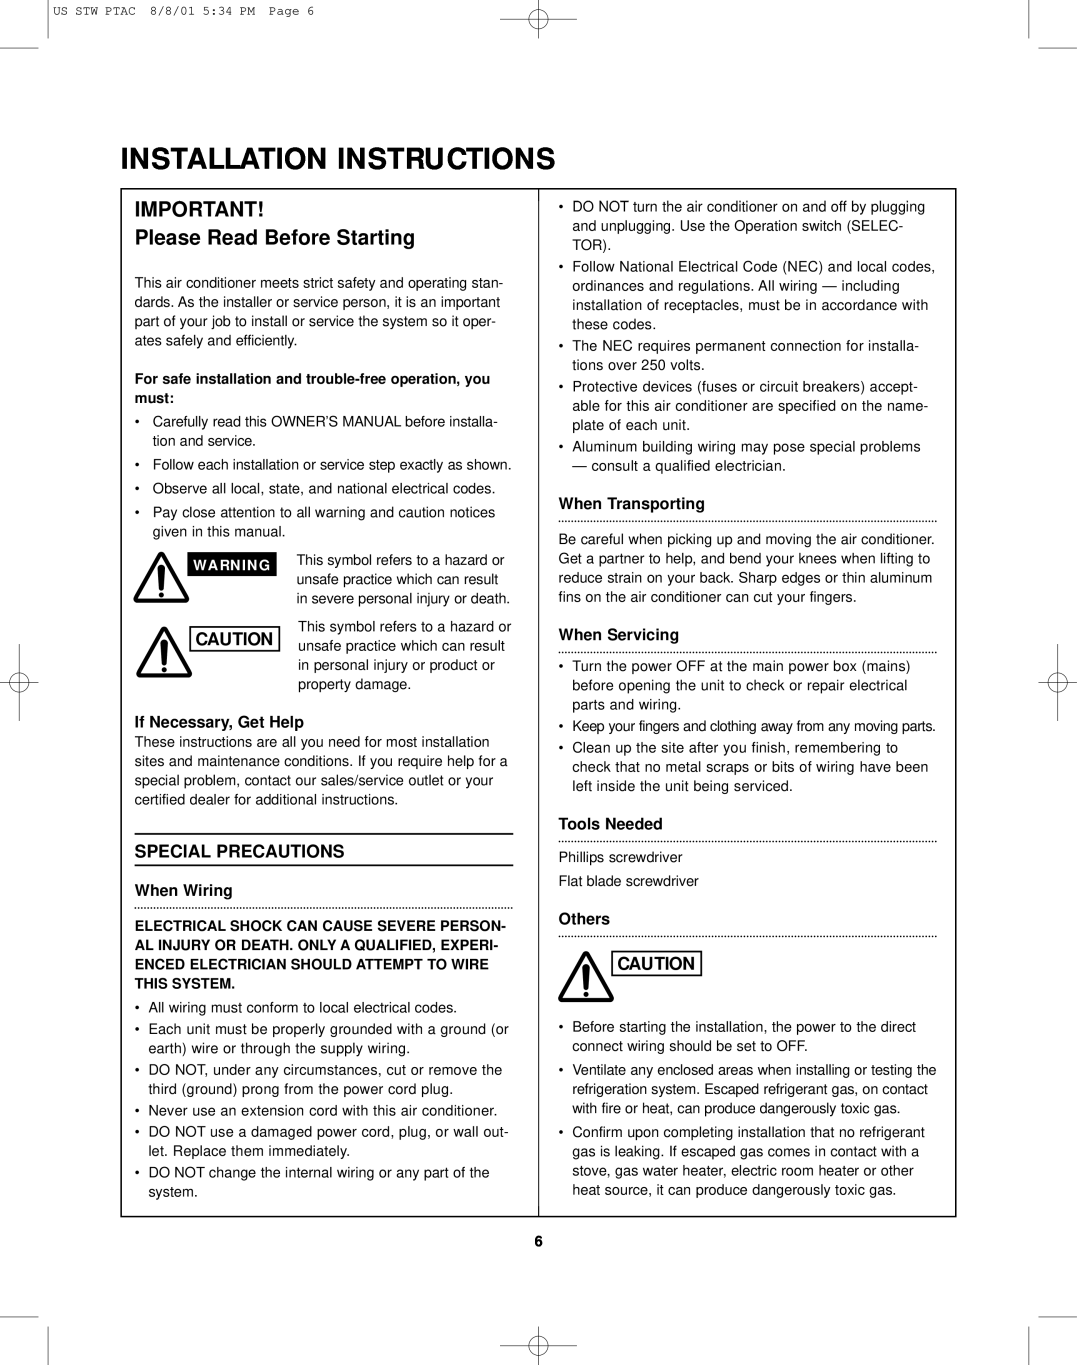 Sanyo STW-2 Installation Instructions, If Necessary, Get Help, When Wiring, When Transporting, When Servicing, Others 